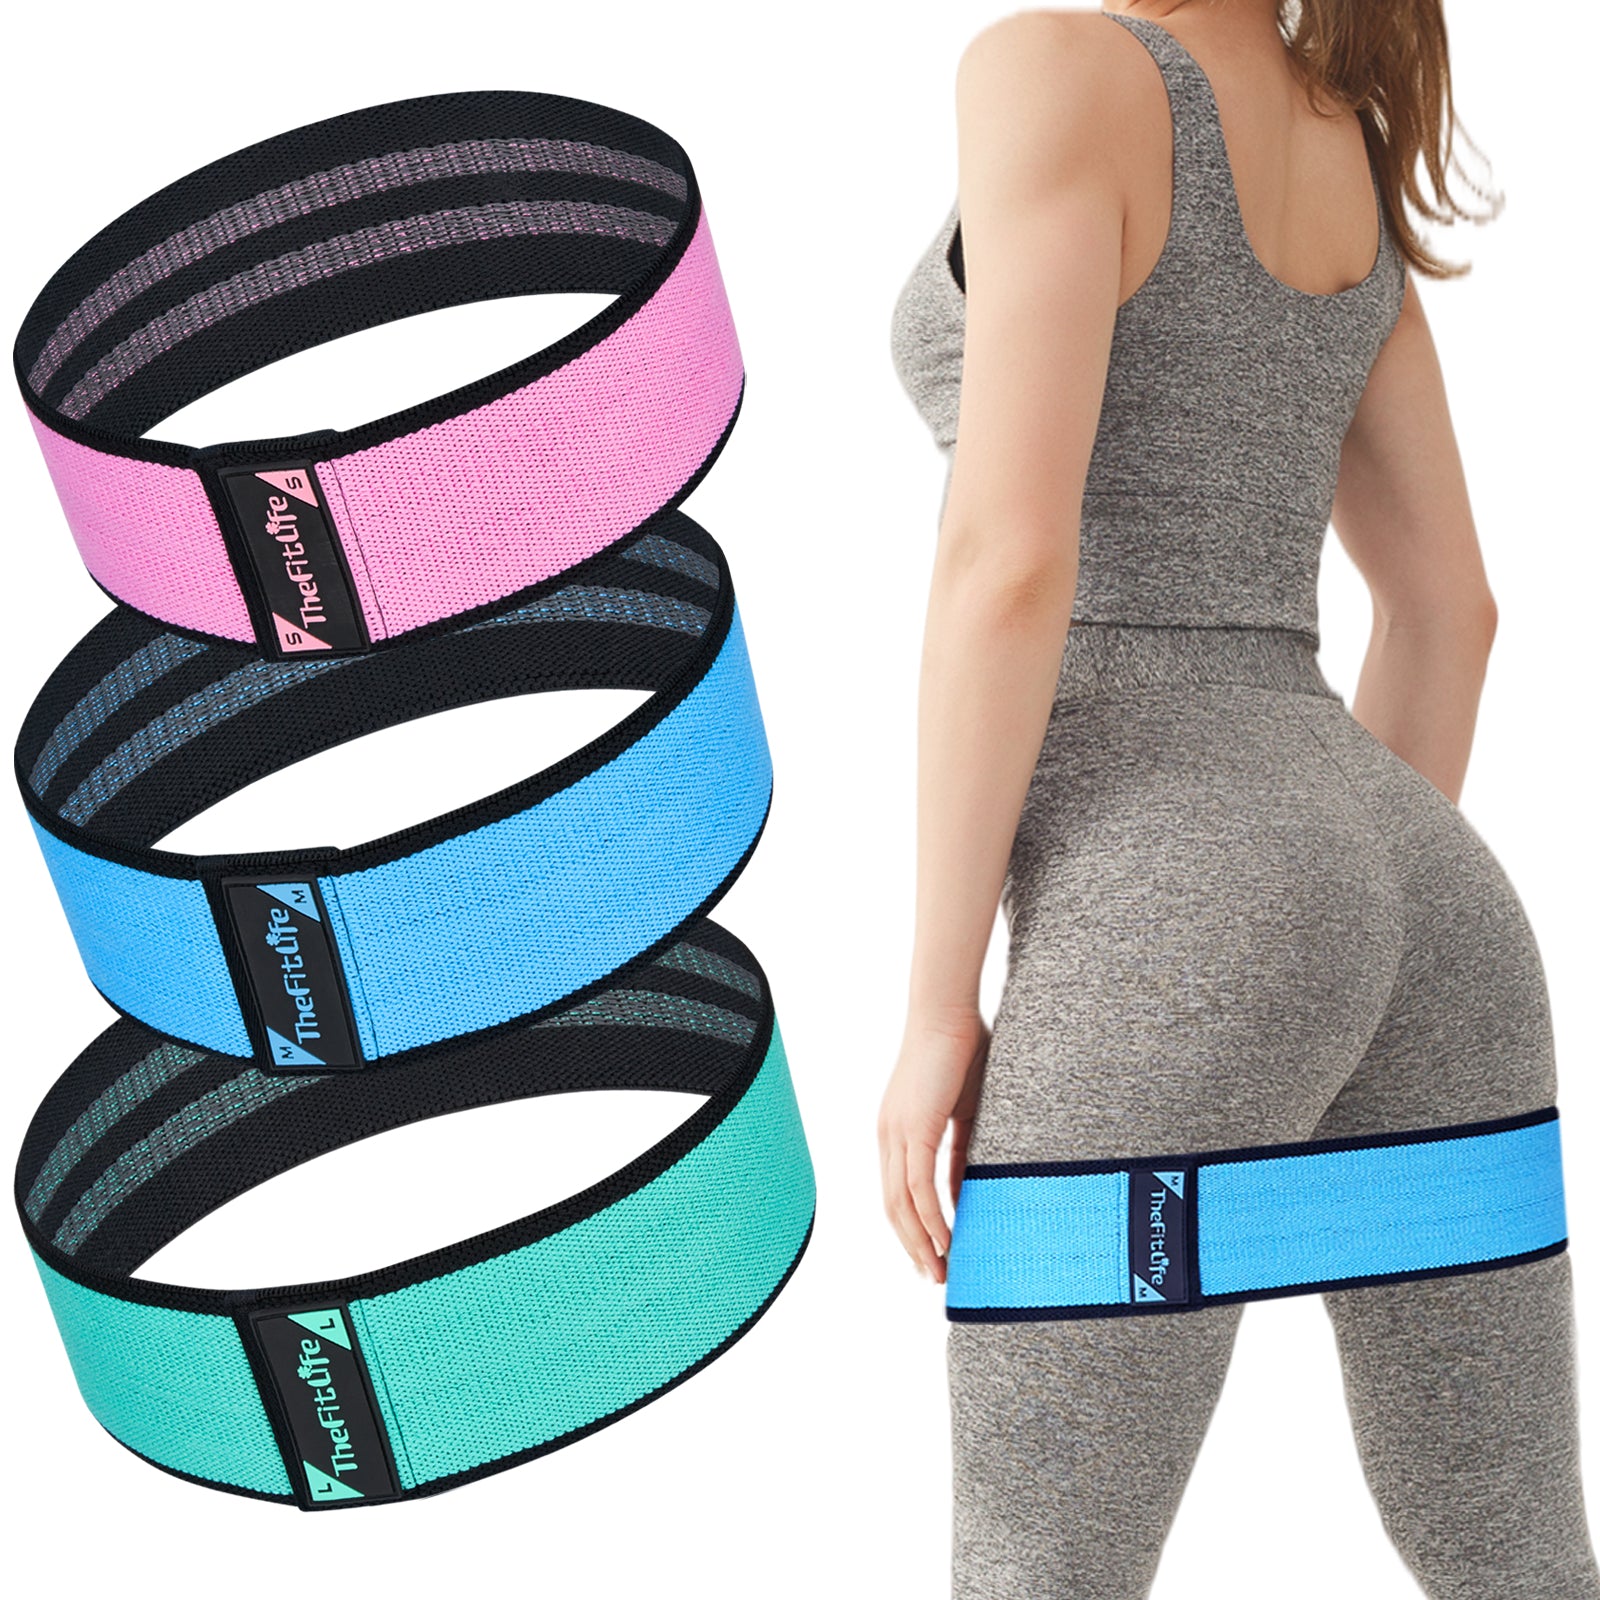 TheFitLife Resistance Bands for Legs and Butt - Cotton Mini Exercise B